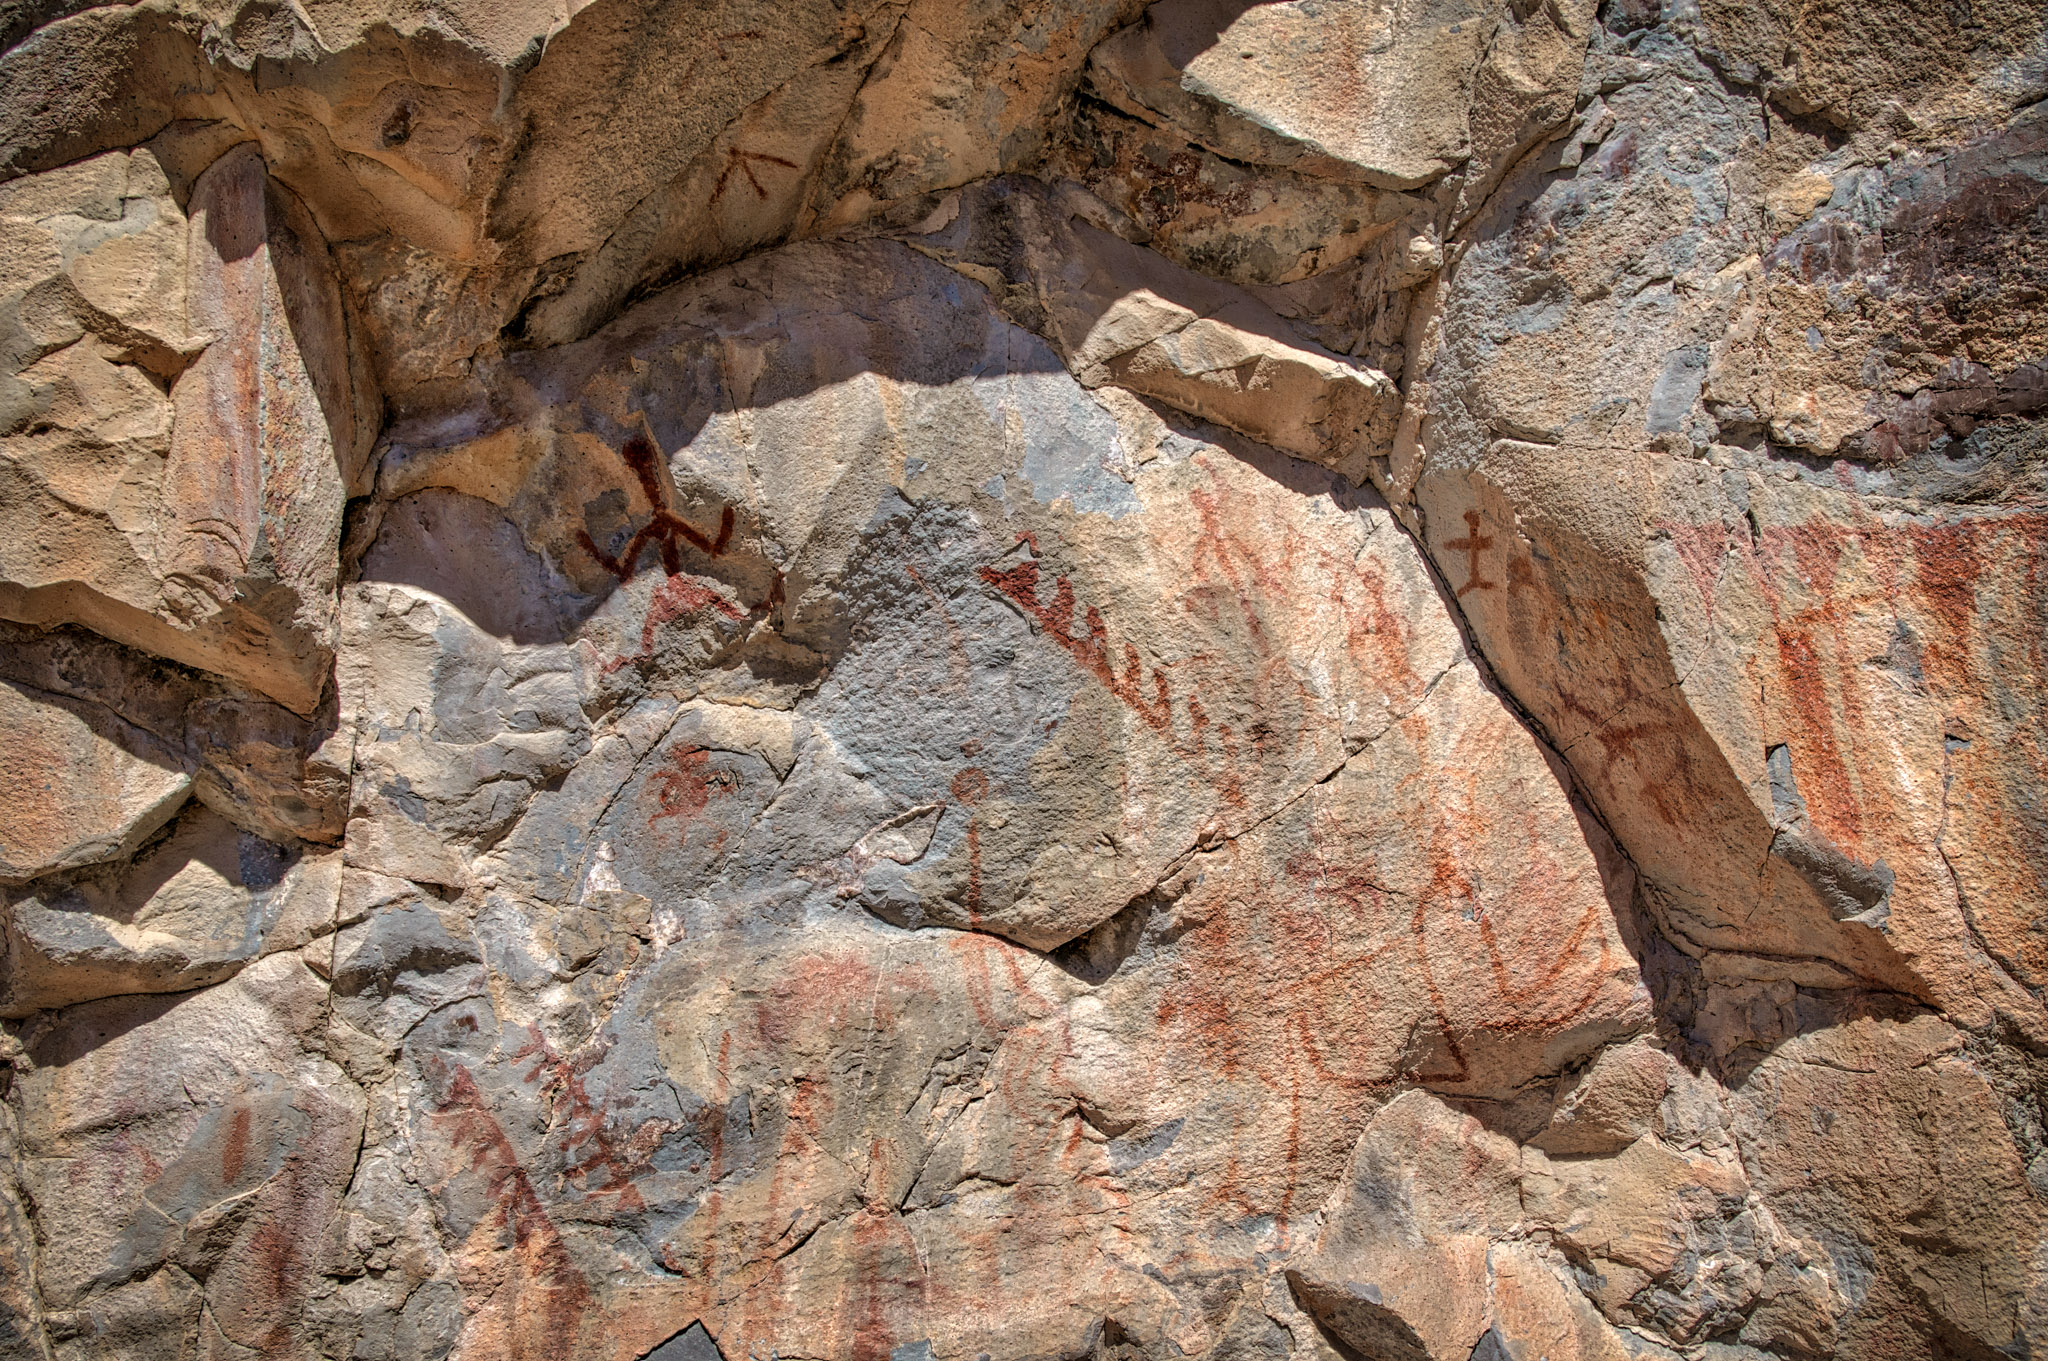 These intriguing pictographs along the Trail to the Past were painted using ground hematite (an iron ore).